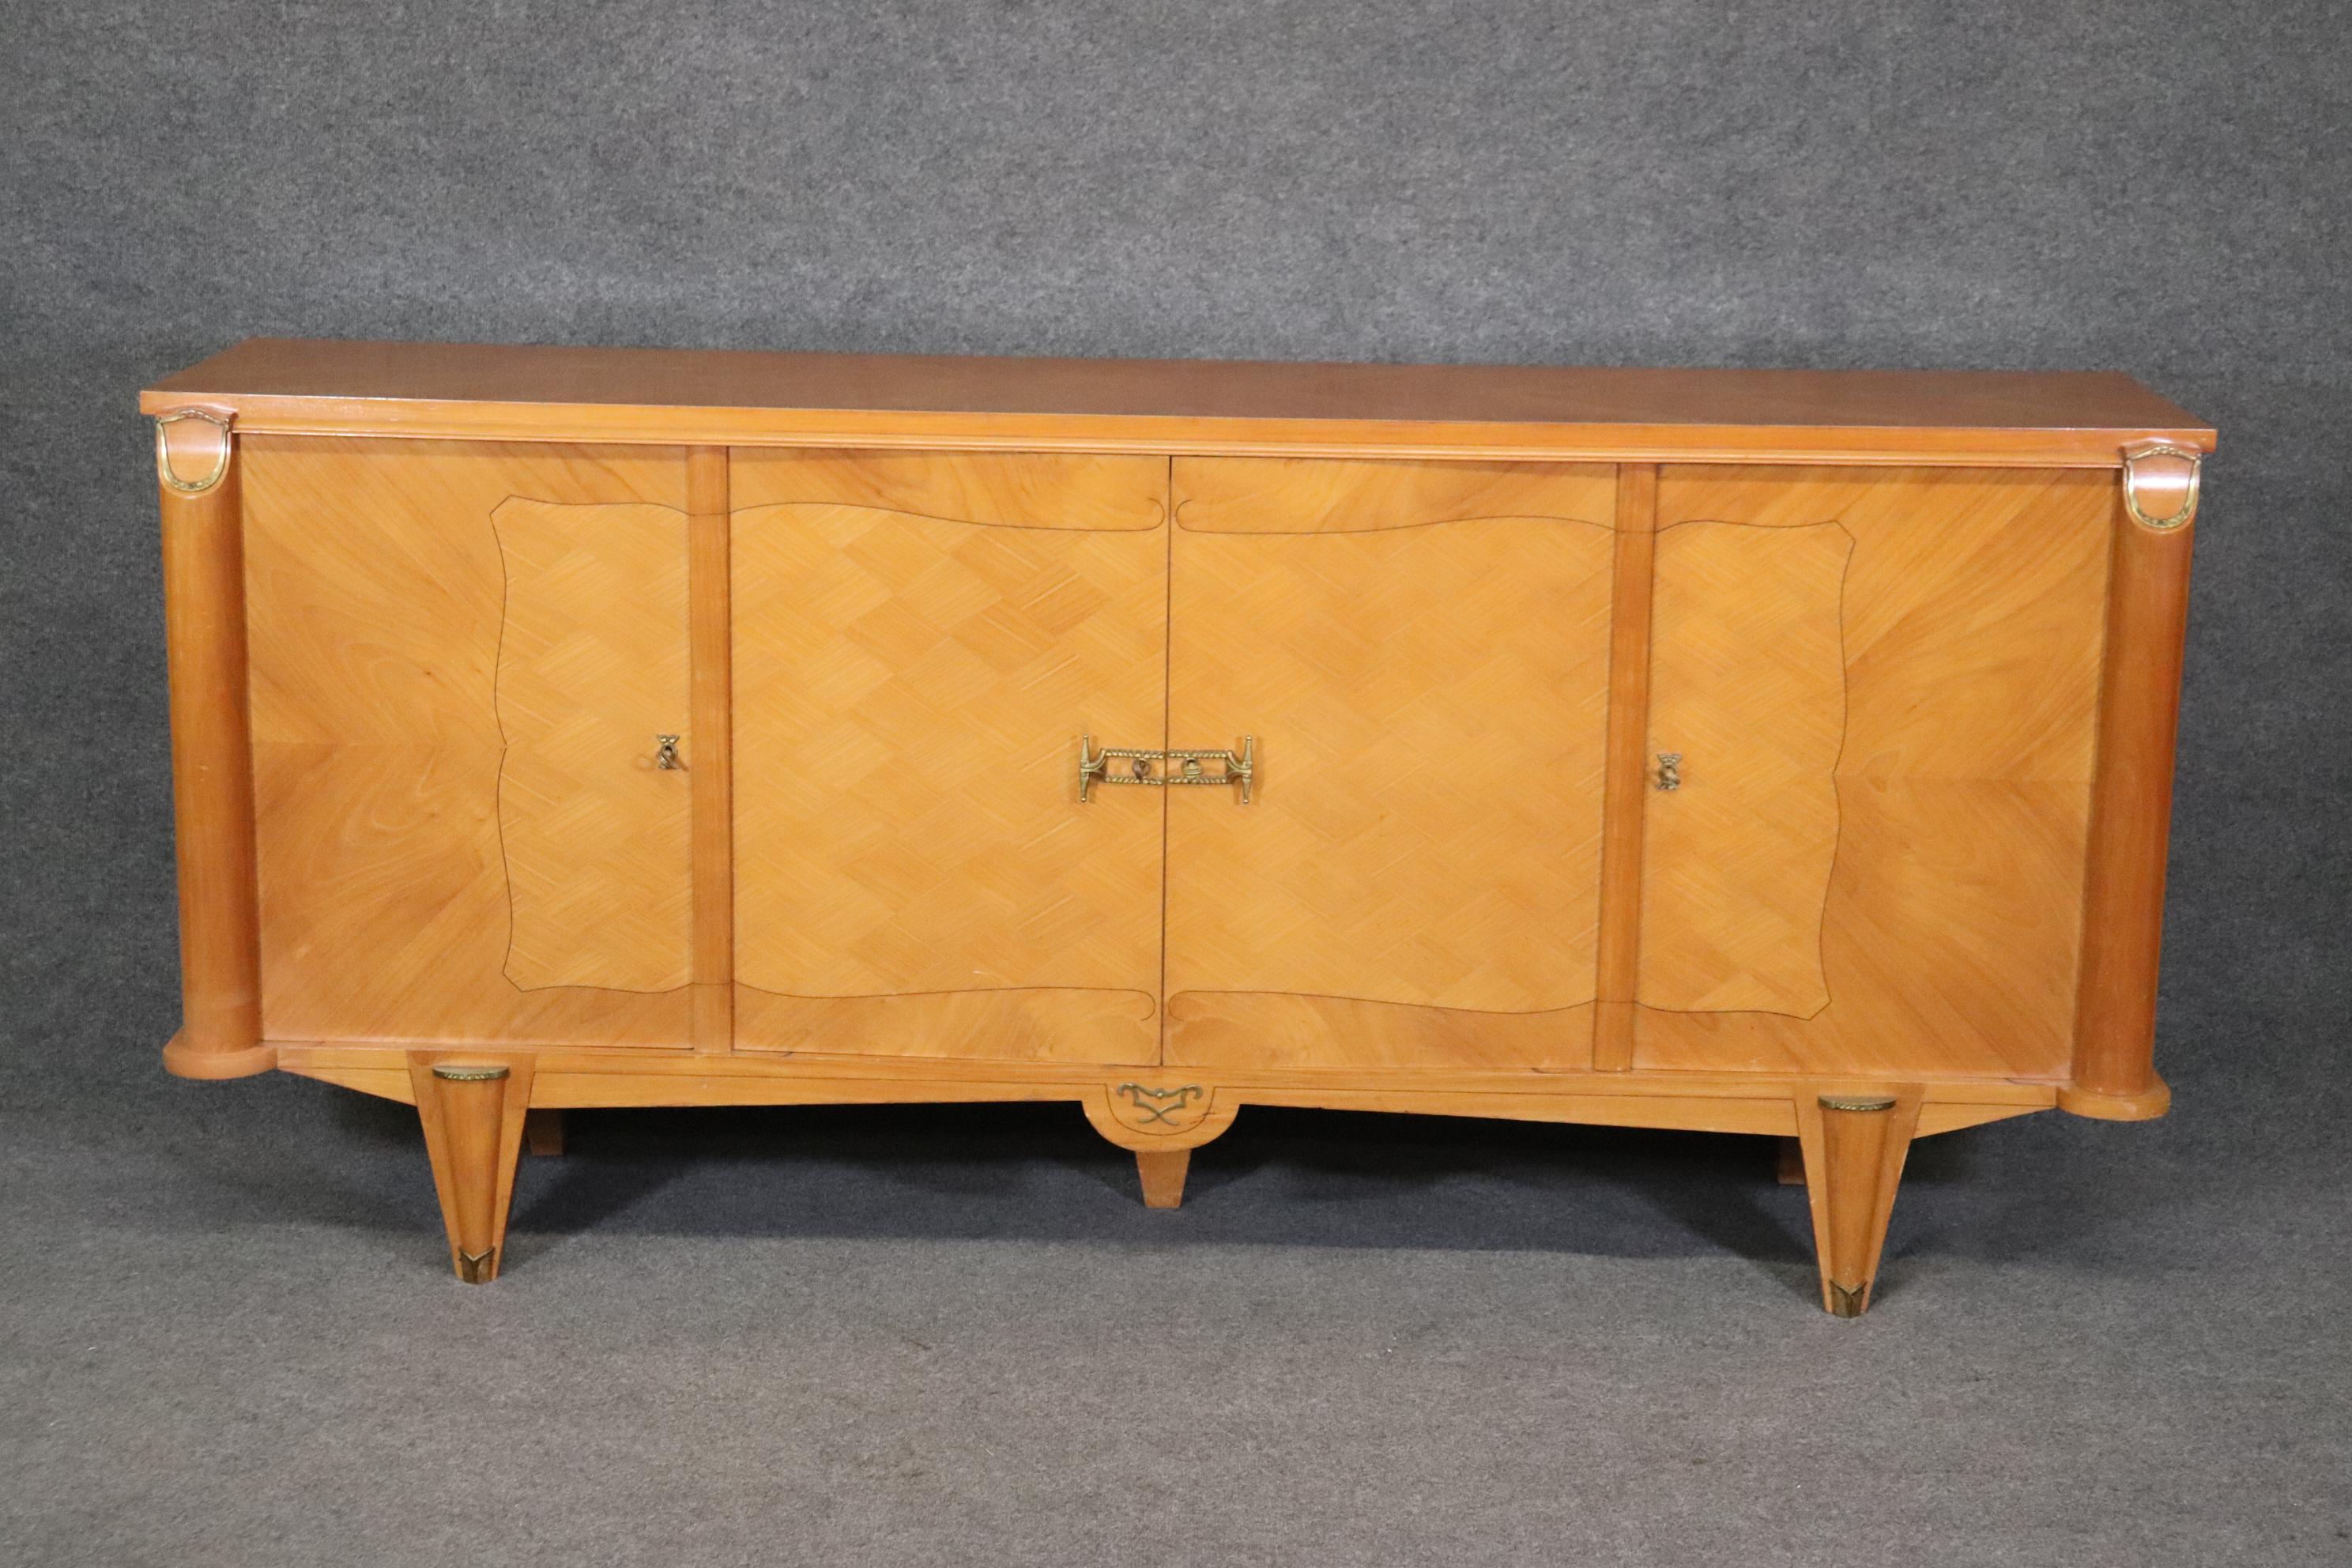 This is a fantastic 1940s era French Art Deco sideboard in the style of Andre Arbus. The piece was made in France and has matching pieces listed separatey. The piece is an incredible design in cherry and done with marquetry veneer. The dimensions